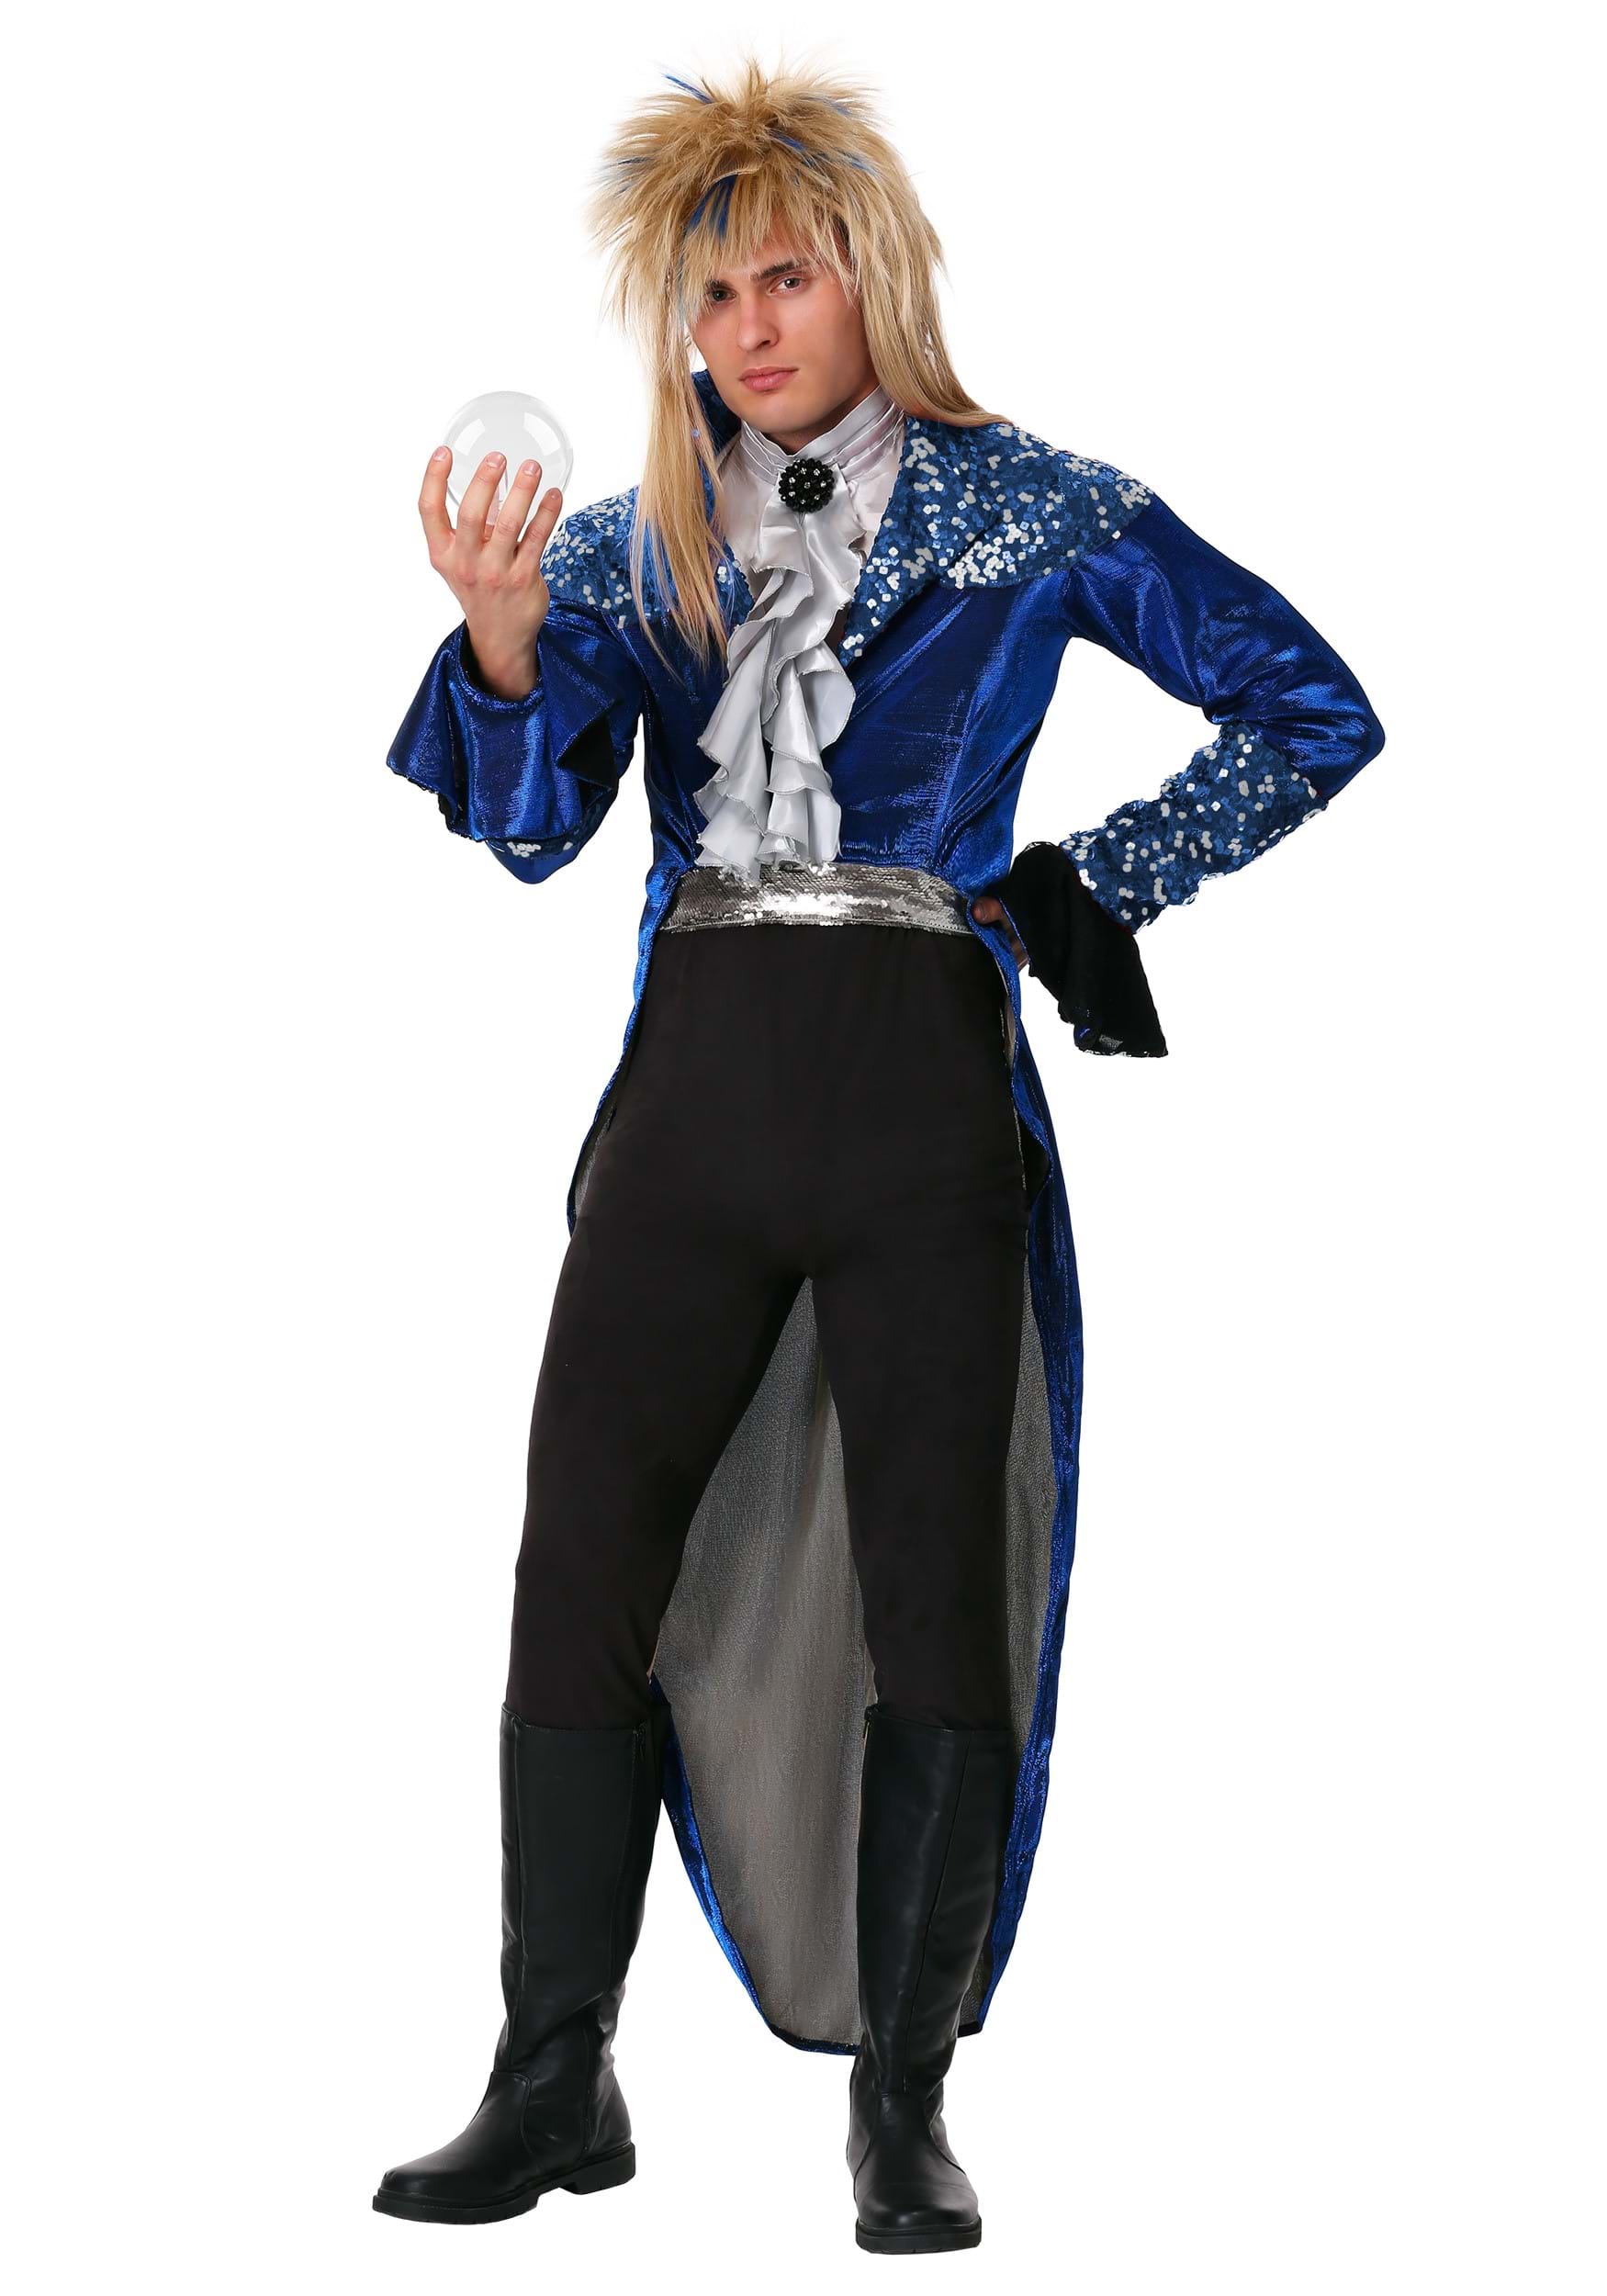 Photos - Fancy Dress Deluxe FUN Costumes  Labyrinth Jareth Adult Costume Black/Blue/Gray 